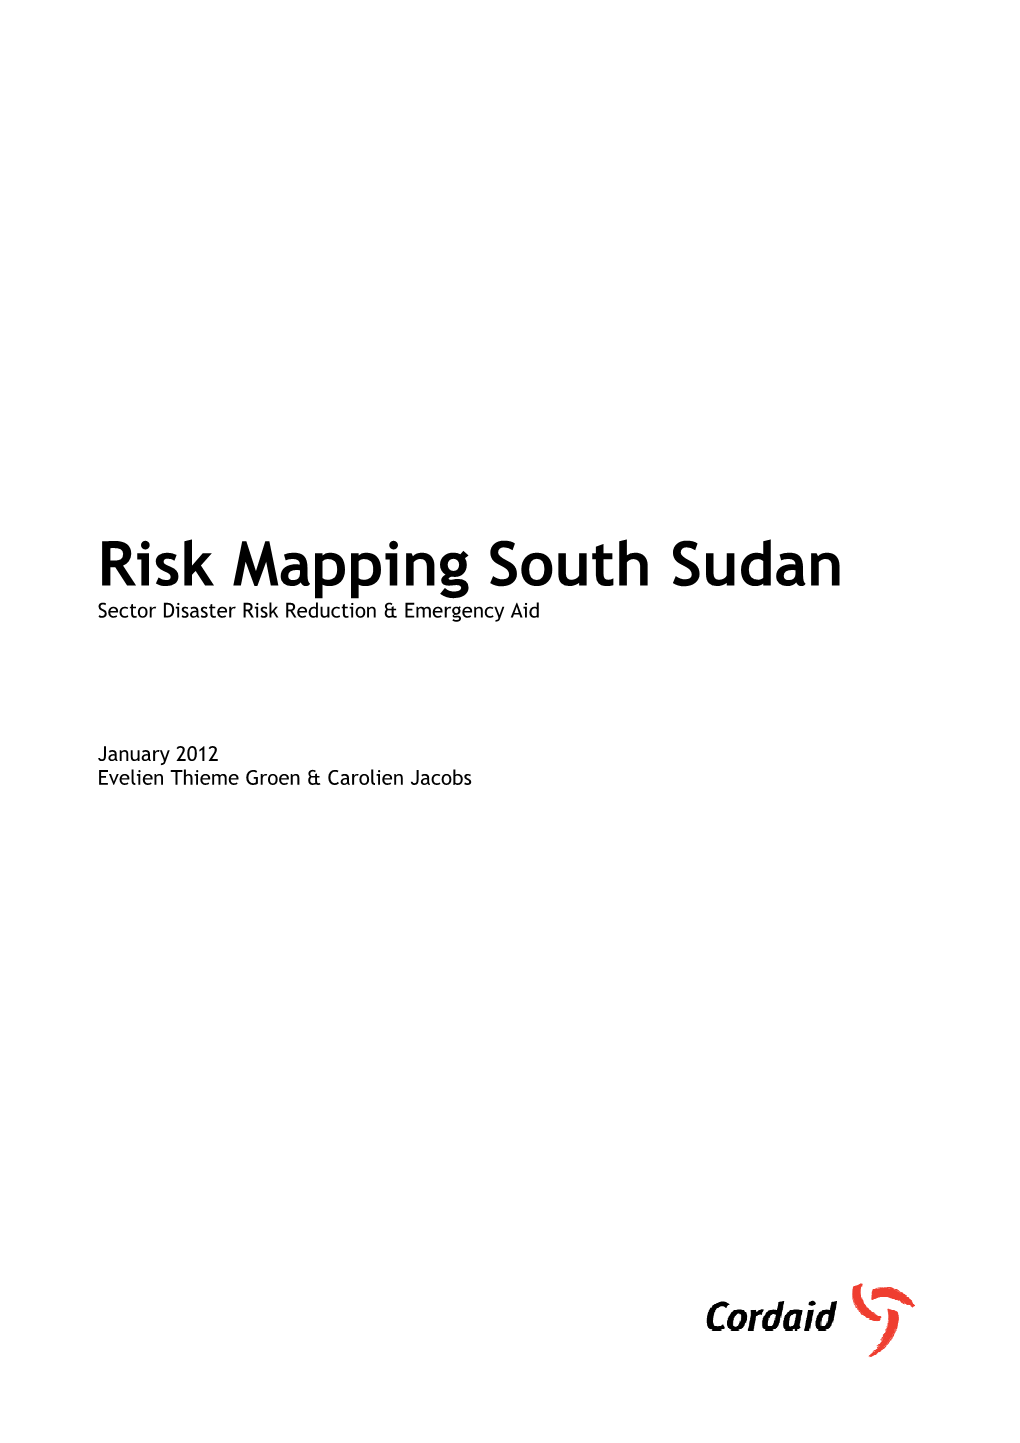 South Sudan Risk Mapping 20120130